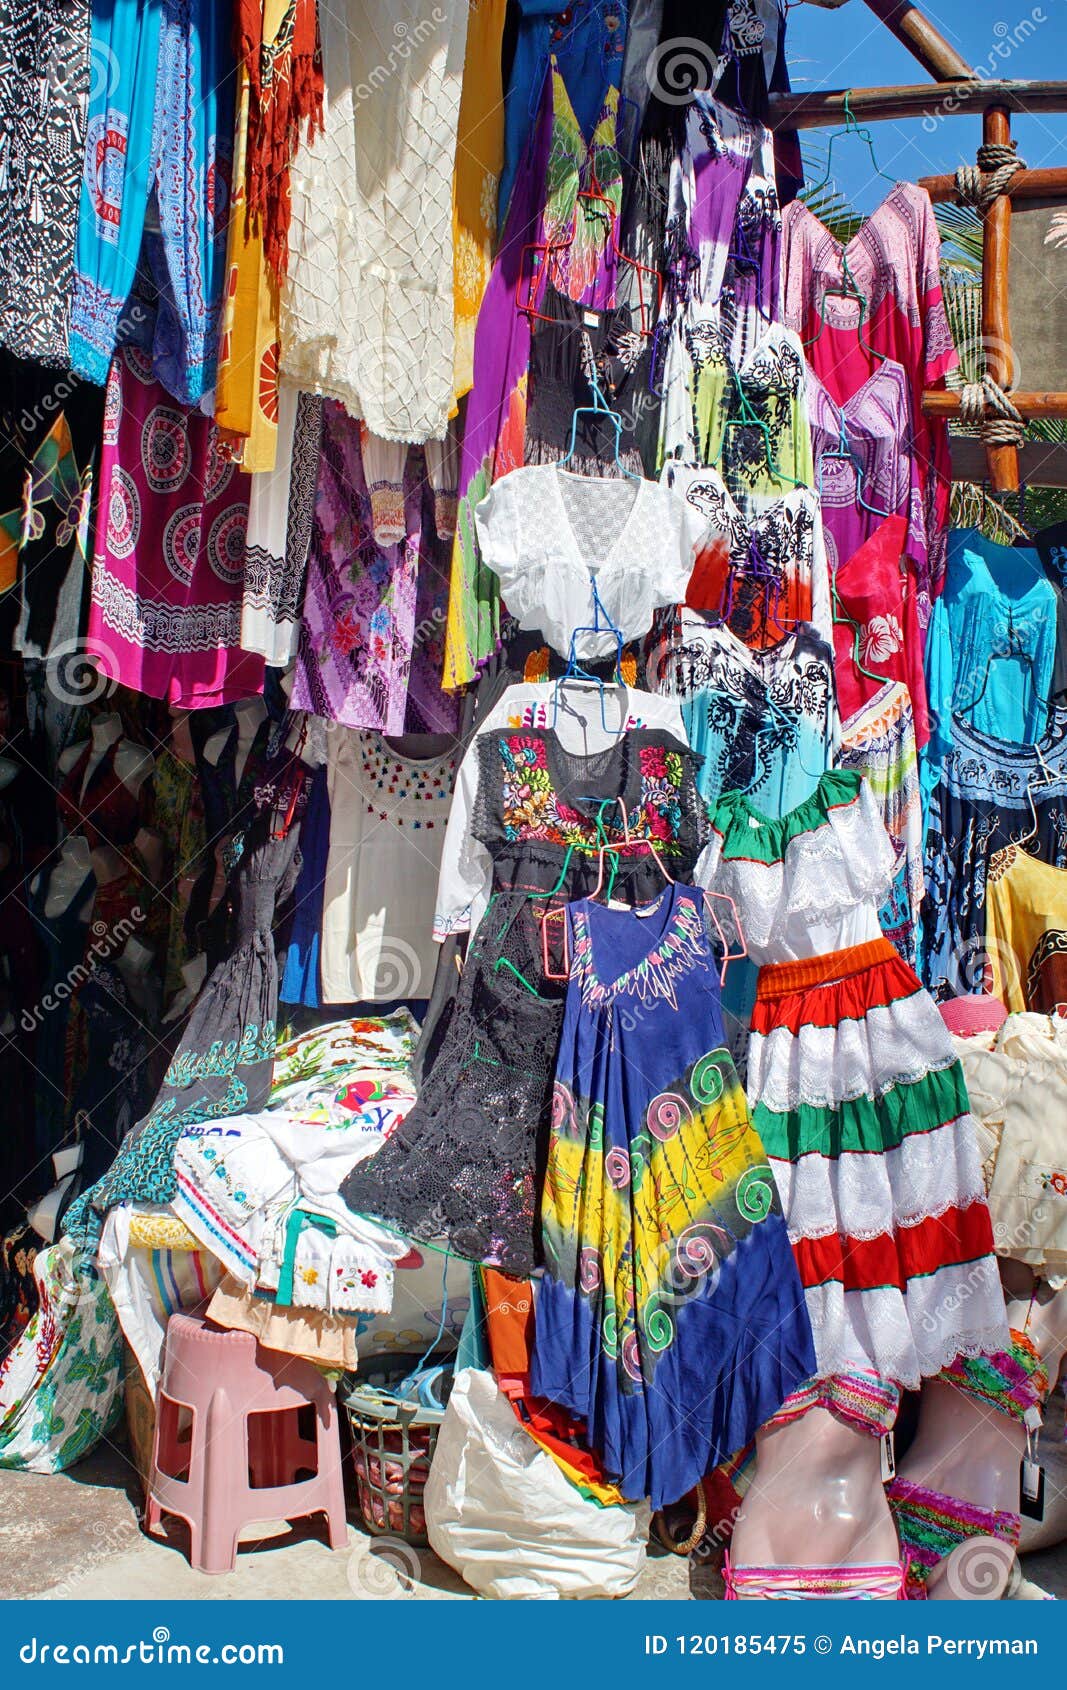 Souvenirs for Sale in Costa Maya Editorial Image - Image of sale ...